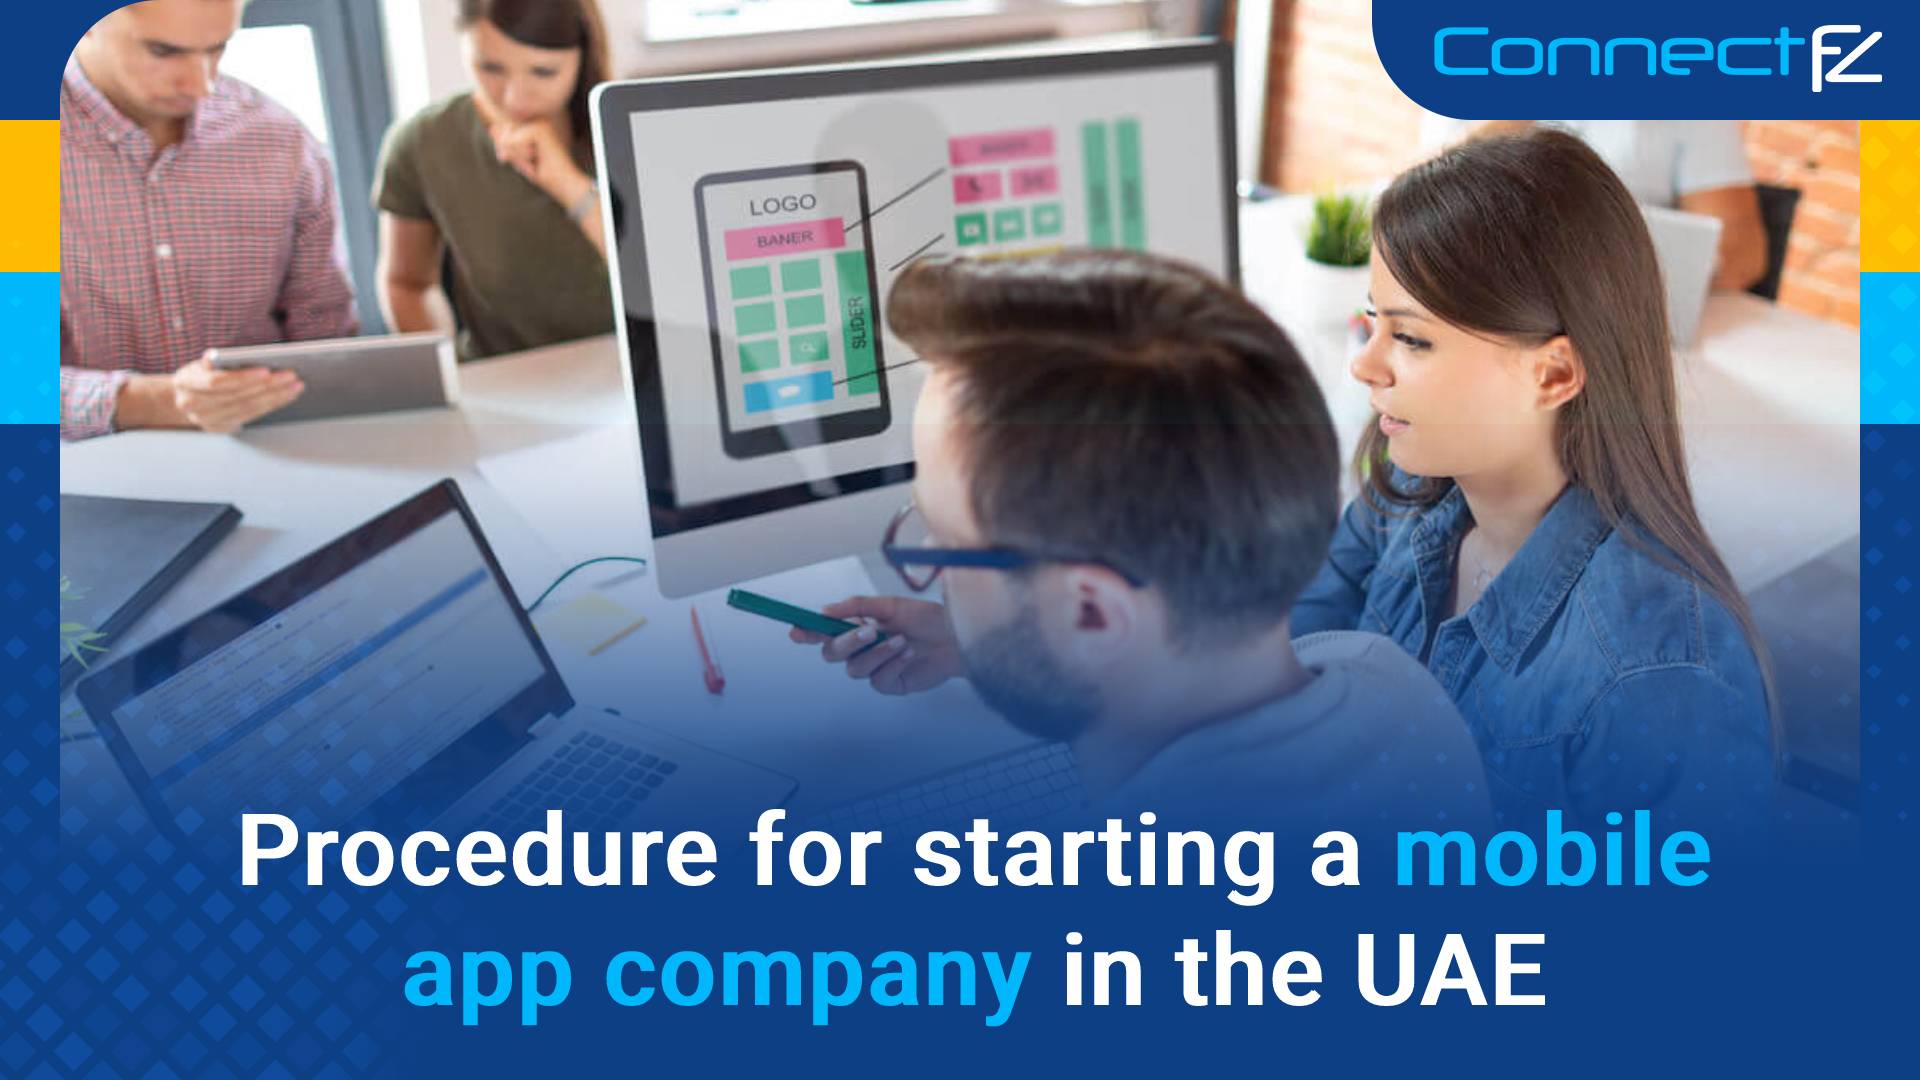 setup of a mobile app company in the UAE